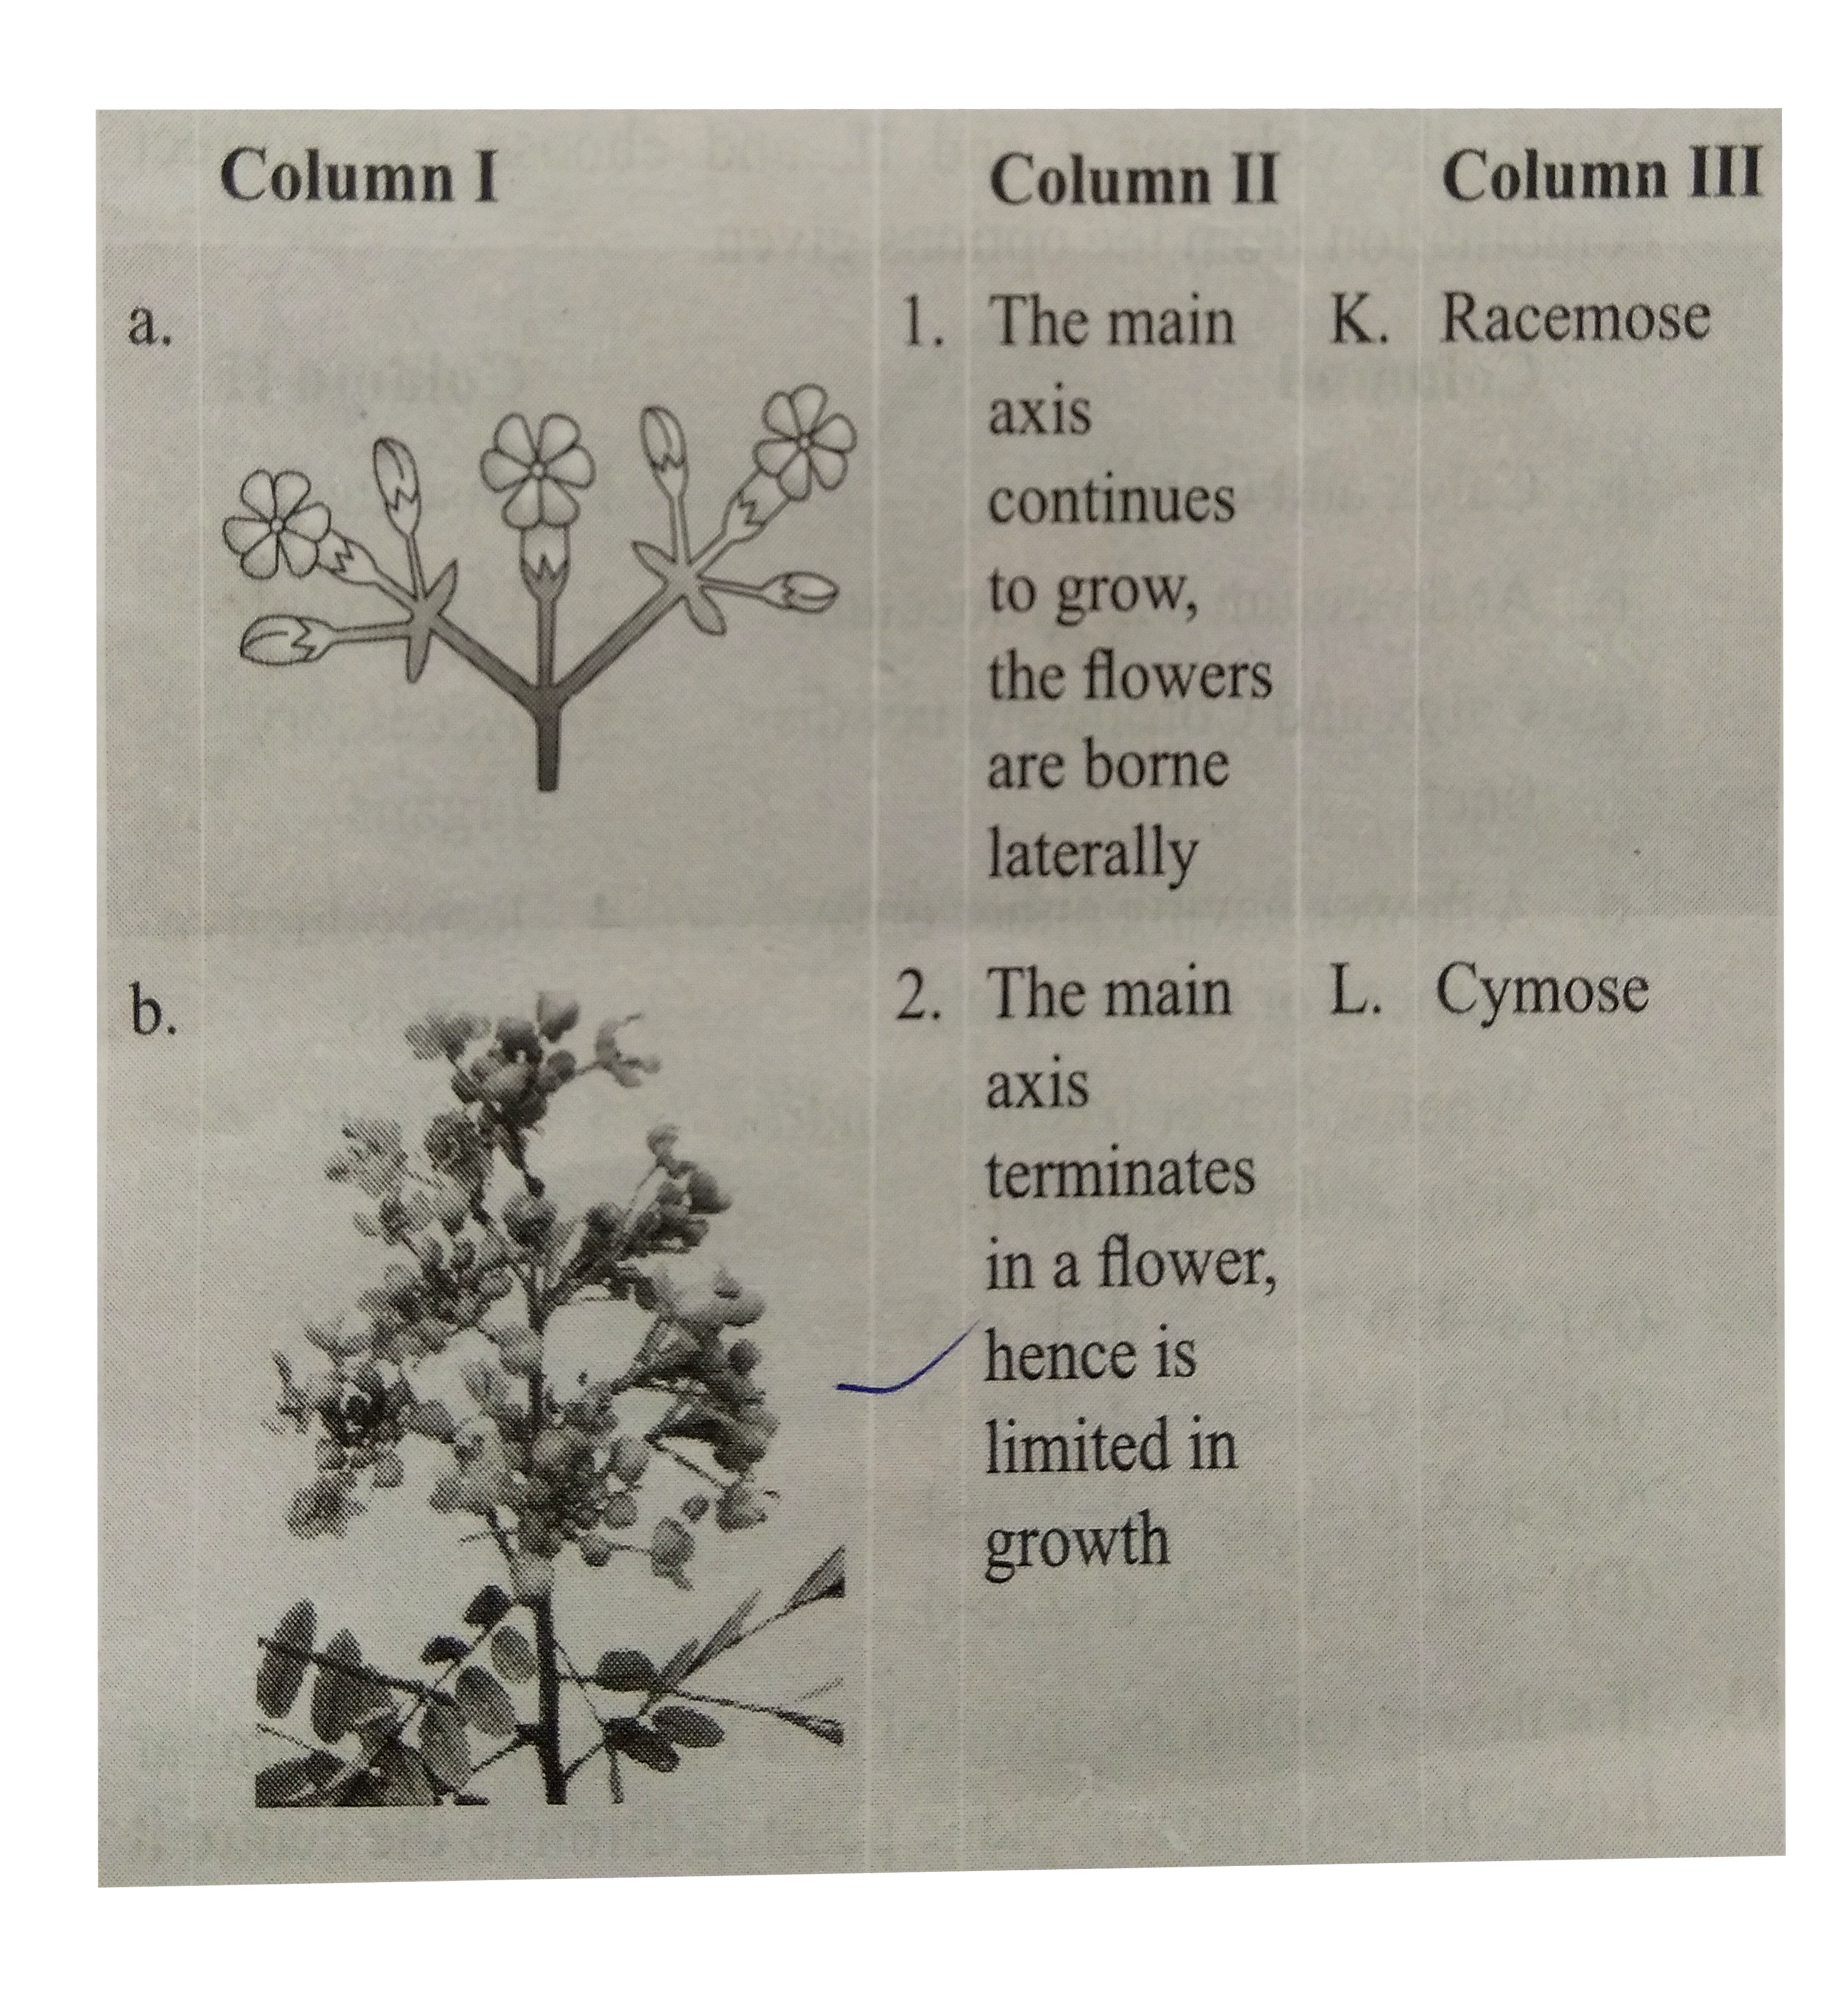 Match the columns I, II and III and choose the correct combination from the options given